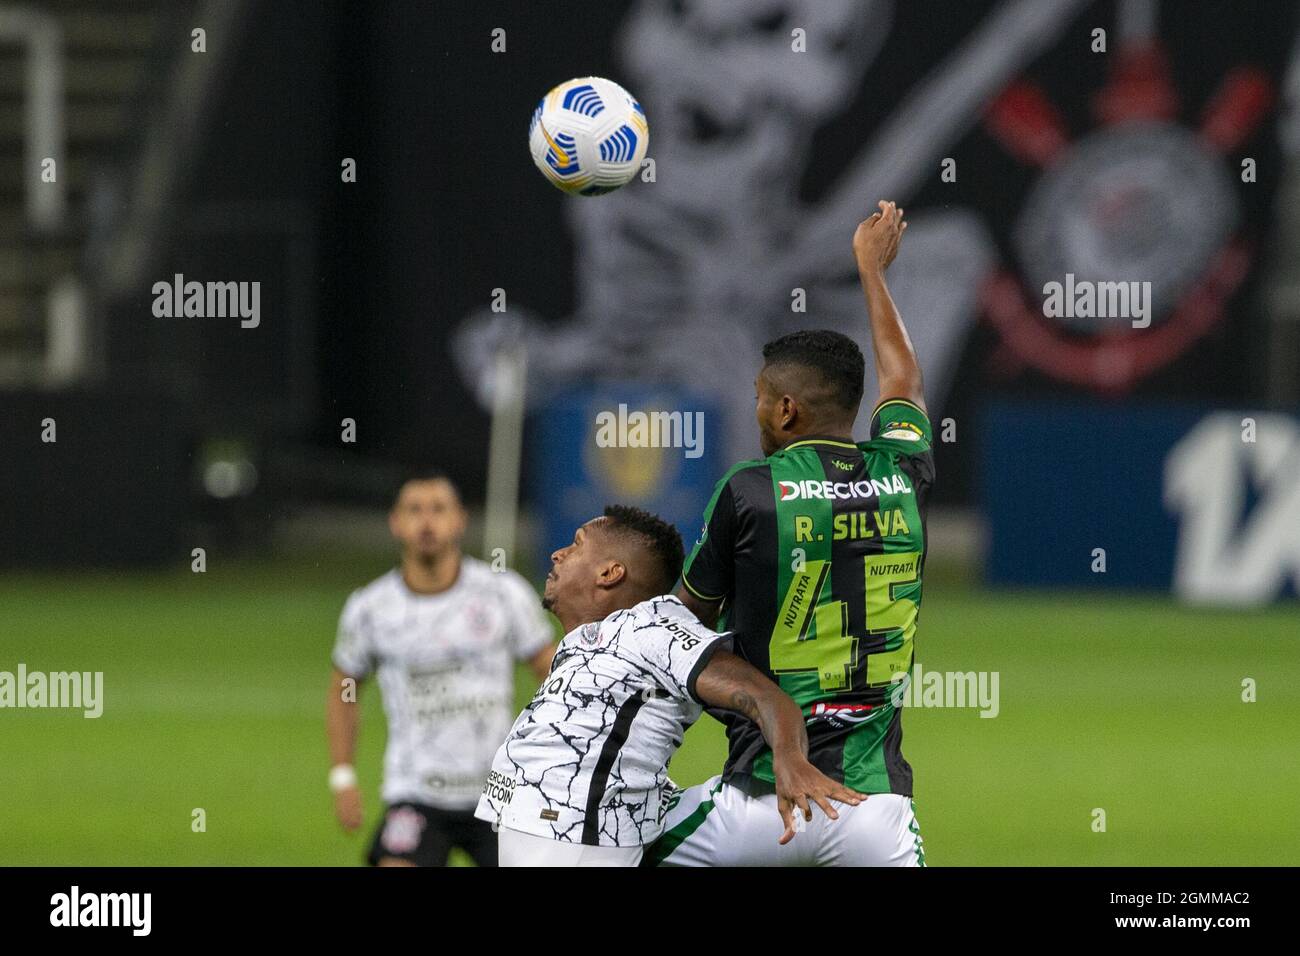 Action during the Campeonato Brasileiro Serie A football match between Corinthians x America Mineiro at the Neo Quimica Arena in Sao Paulo, Brazil